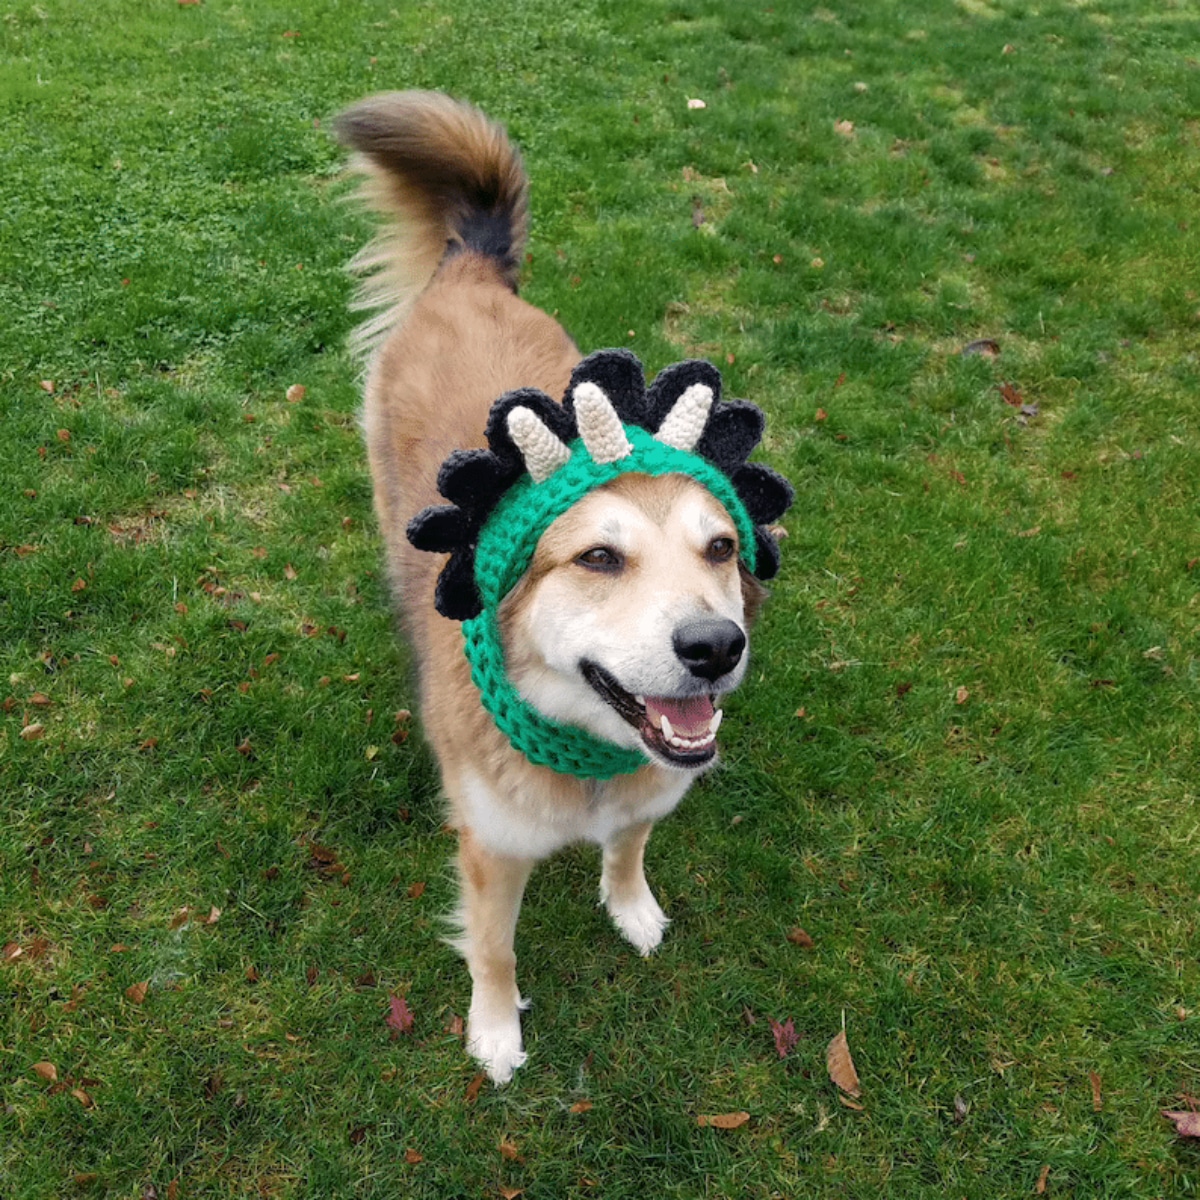 Large brown Shiba wearing a green crochet hat with white horns and a black dinosaur frill standing in a grassy field.